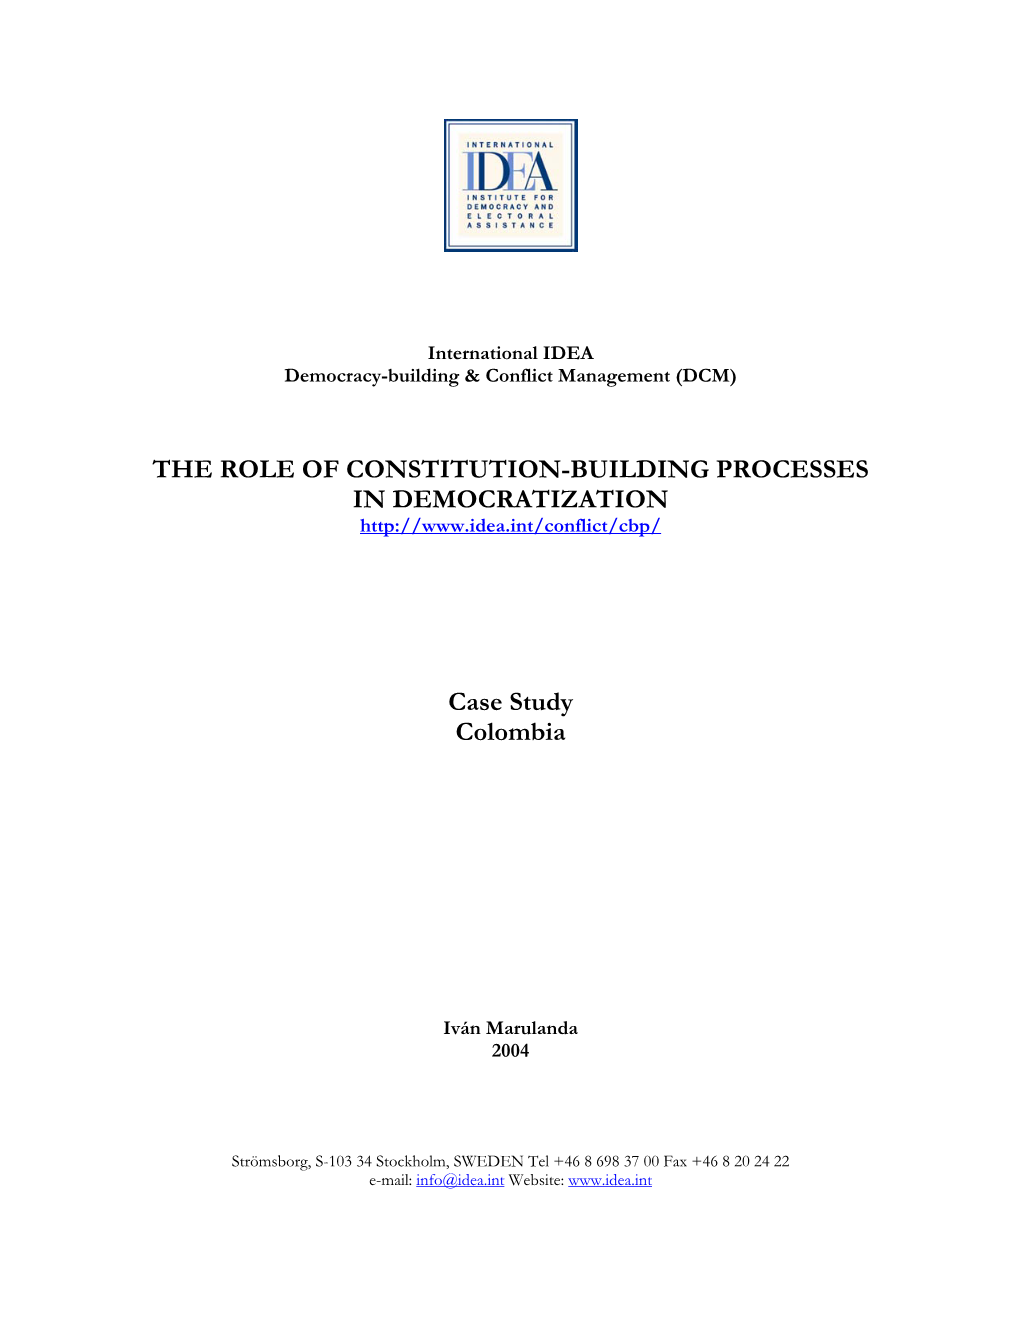 The Role of Constitution-Building Processes in Democratization